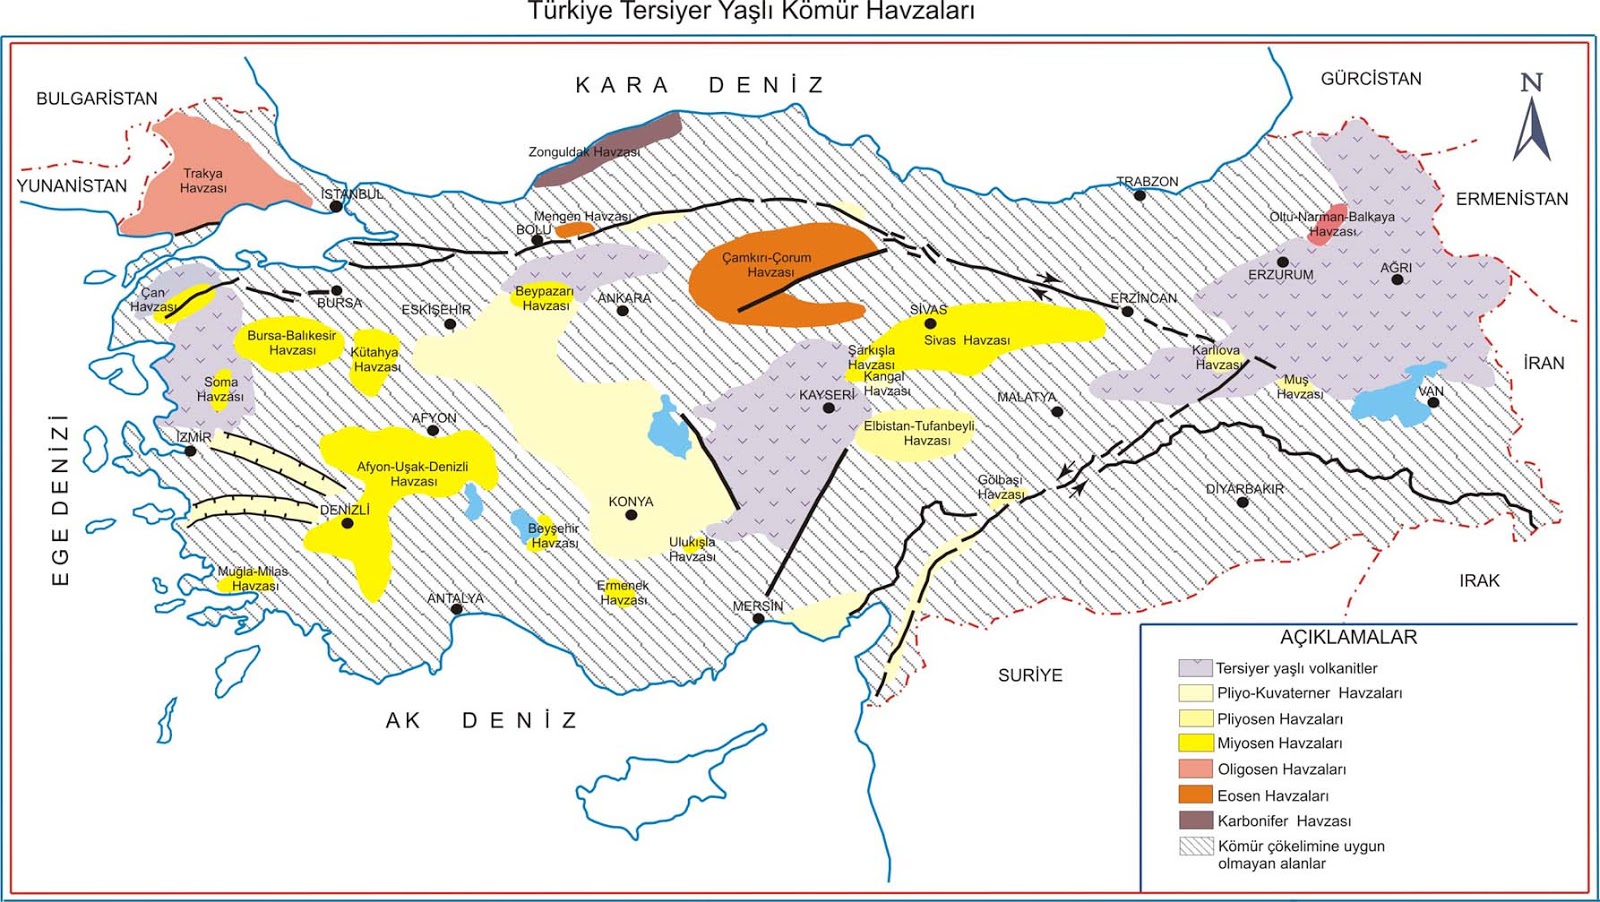 Map of Turkey Tertiary Coal Basins ~ Turkey Physical Political Maps of ...